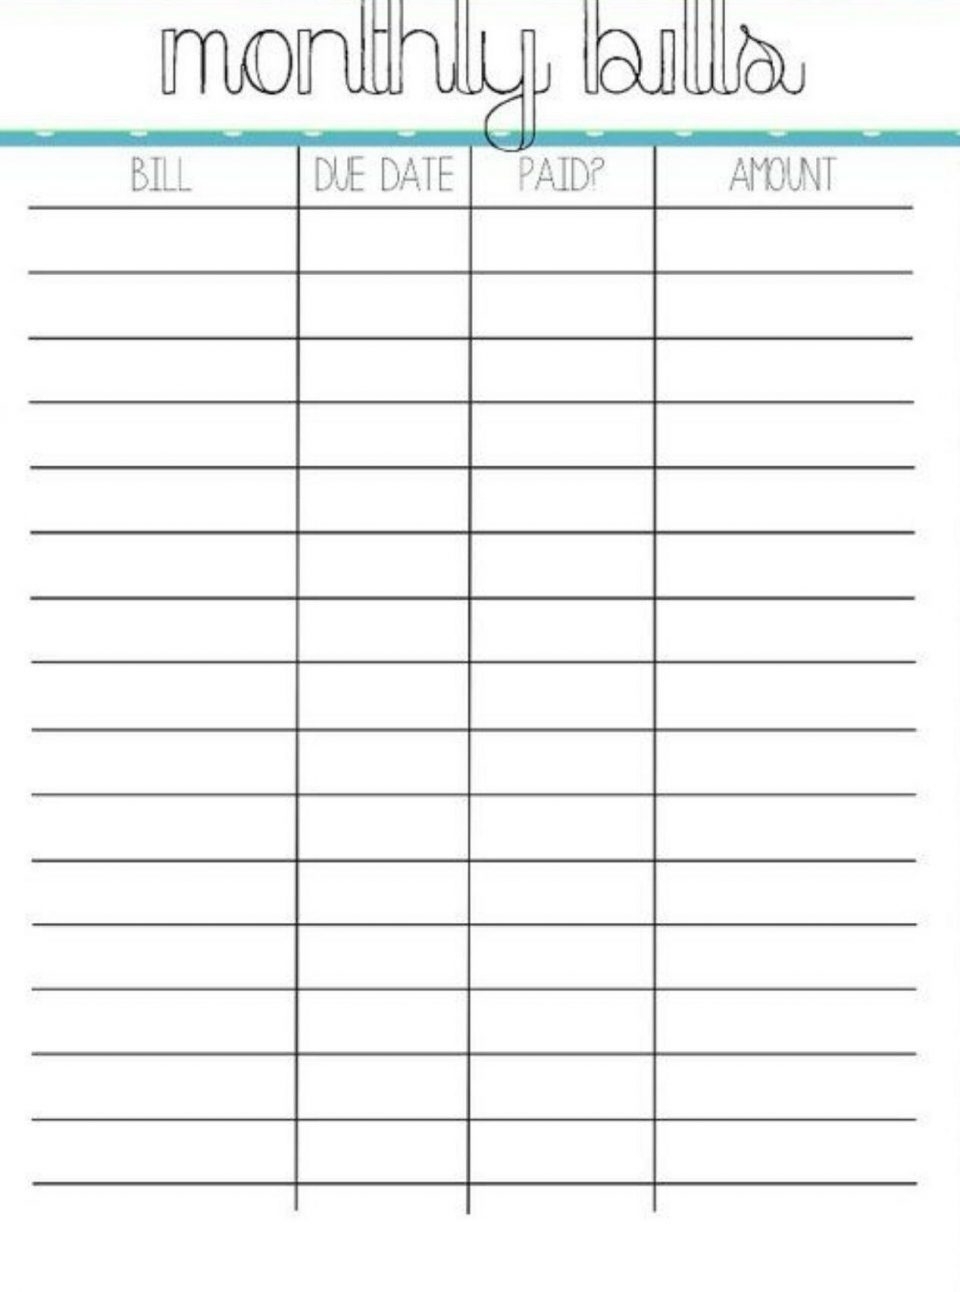 Monthly Bill Sample With Free Printable Organizer Template